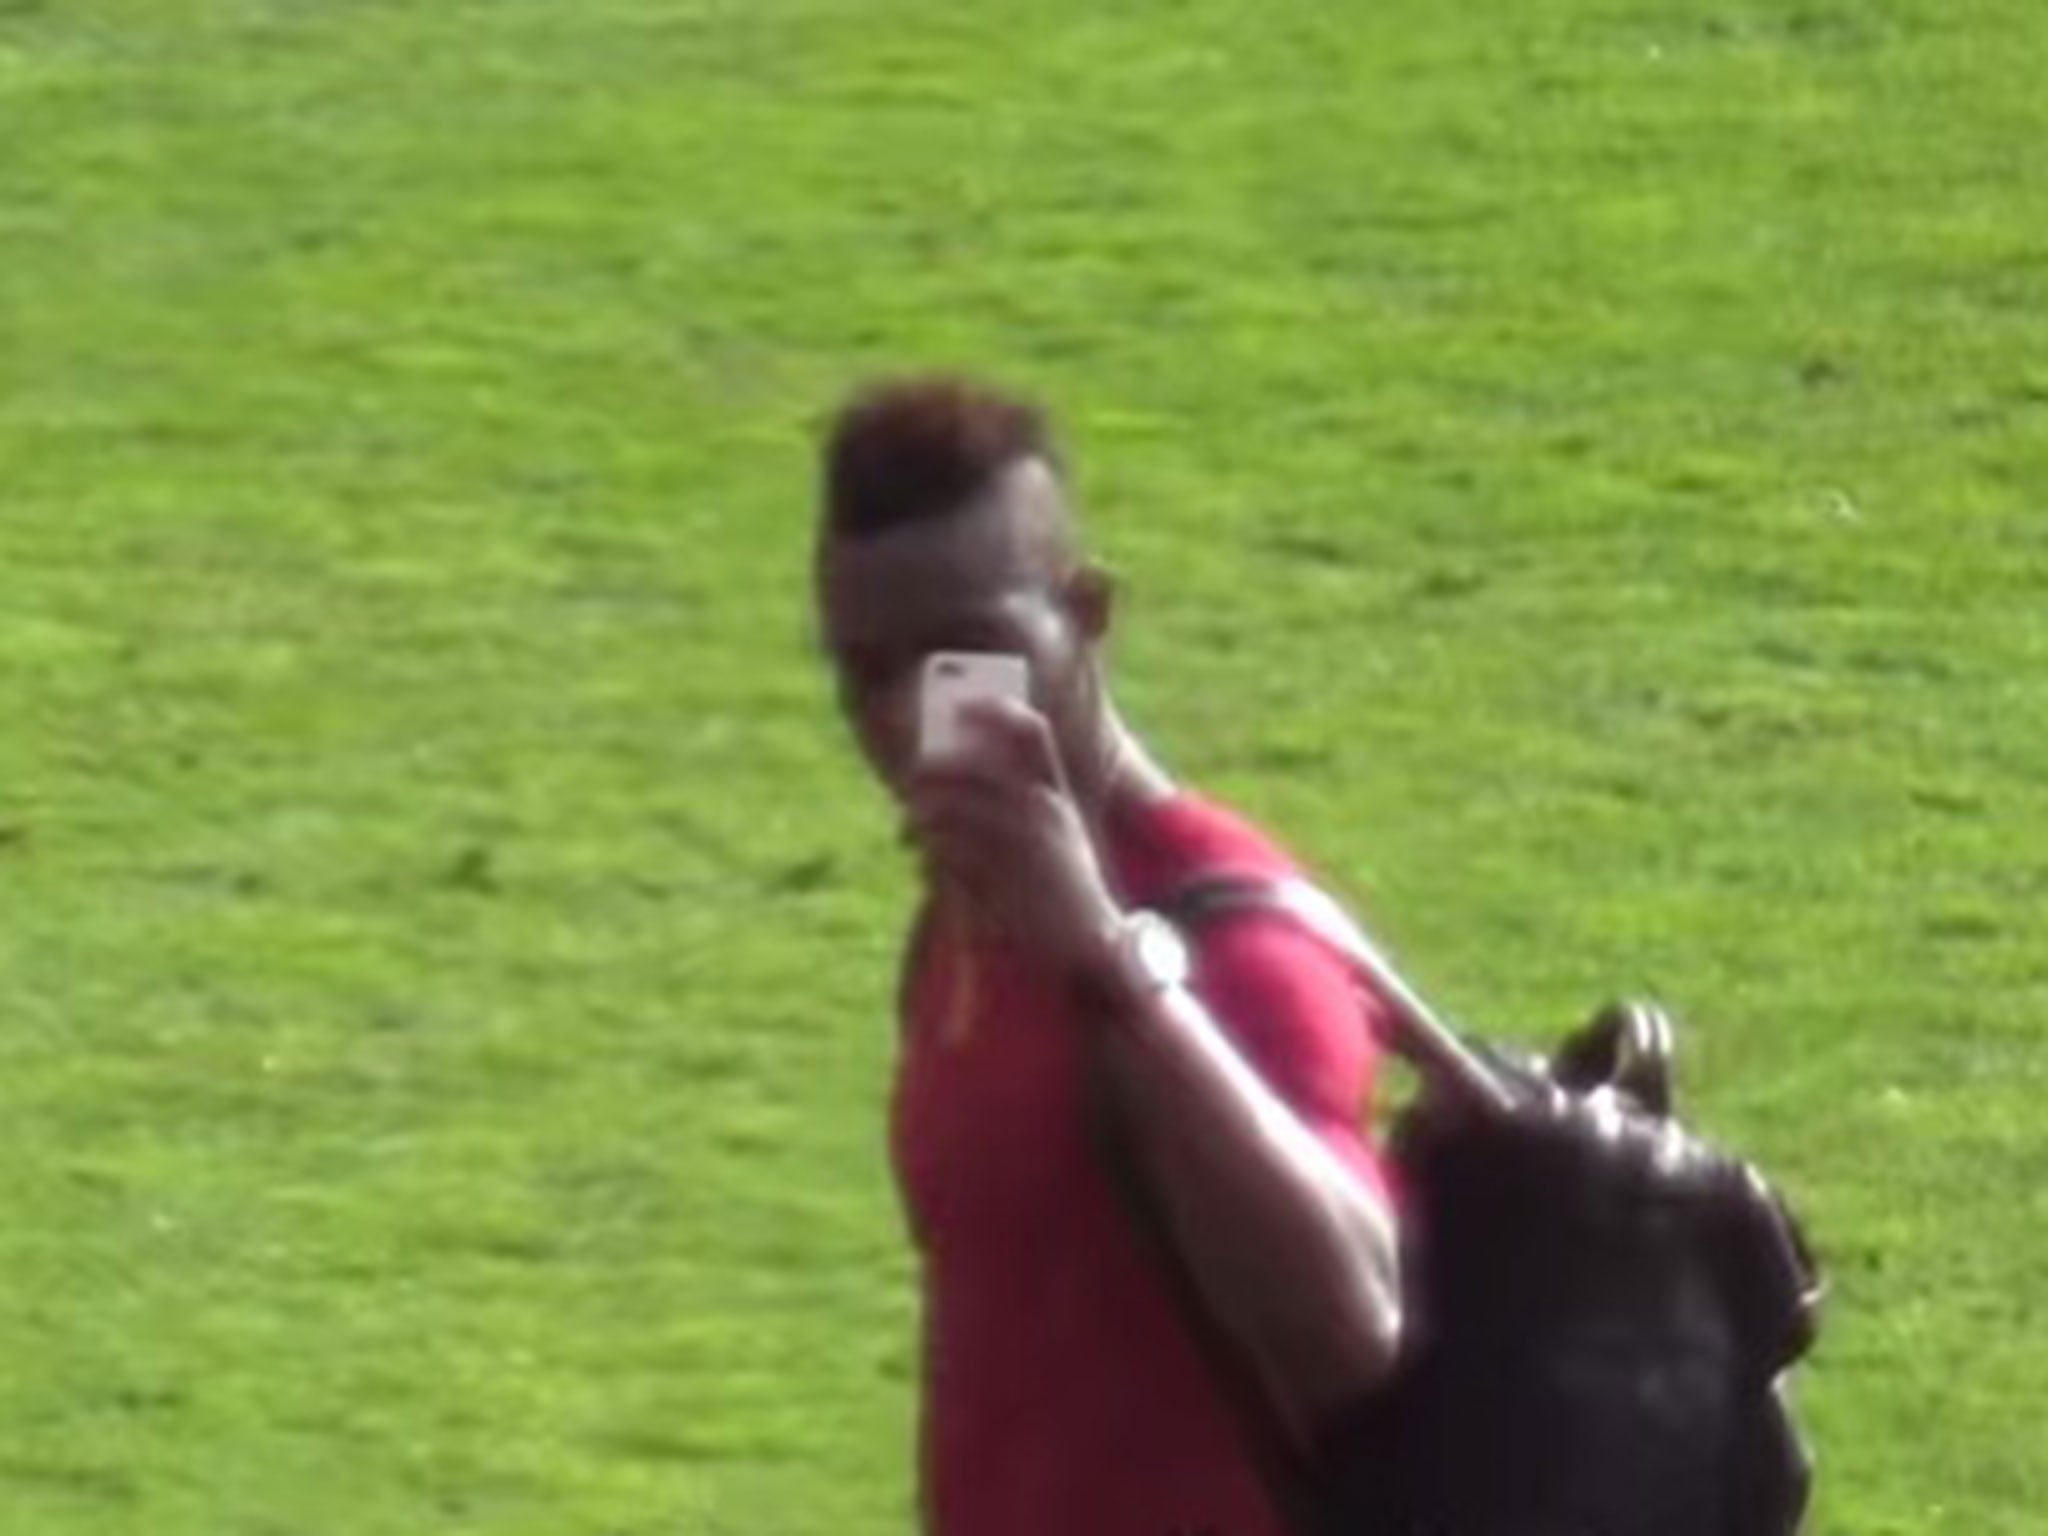 Mario Balotelli films United fans before making appearing to make an obscene gesture at them